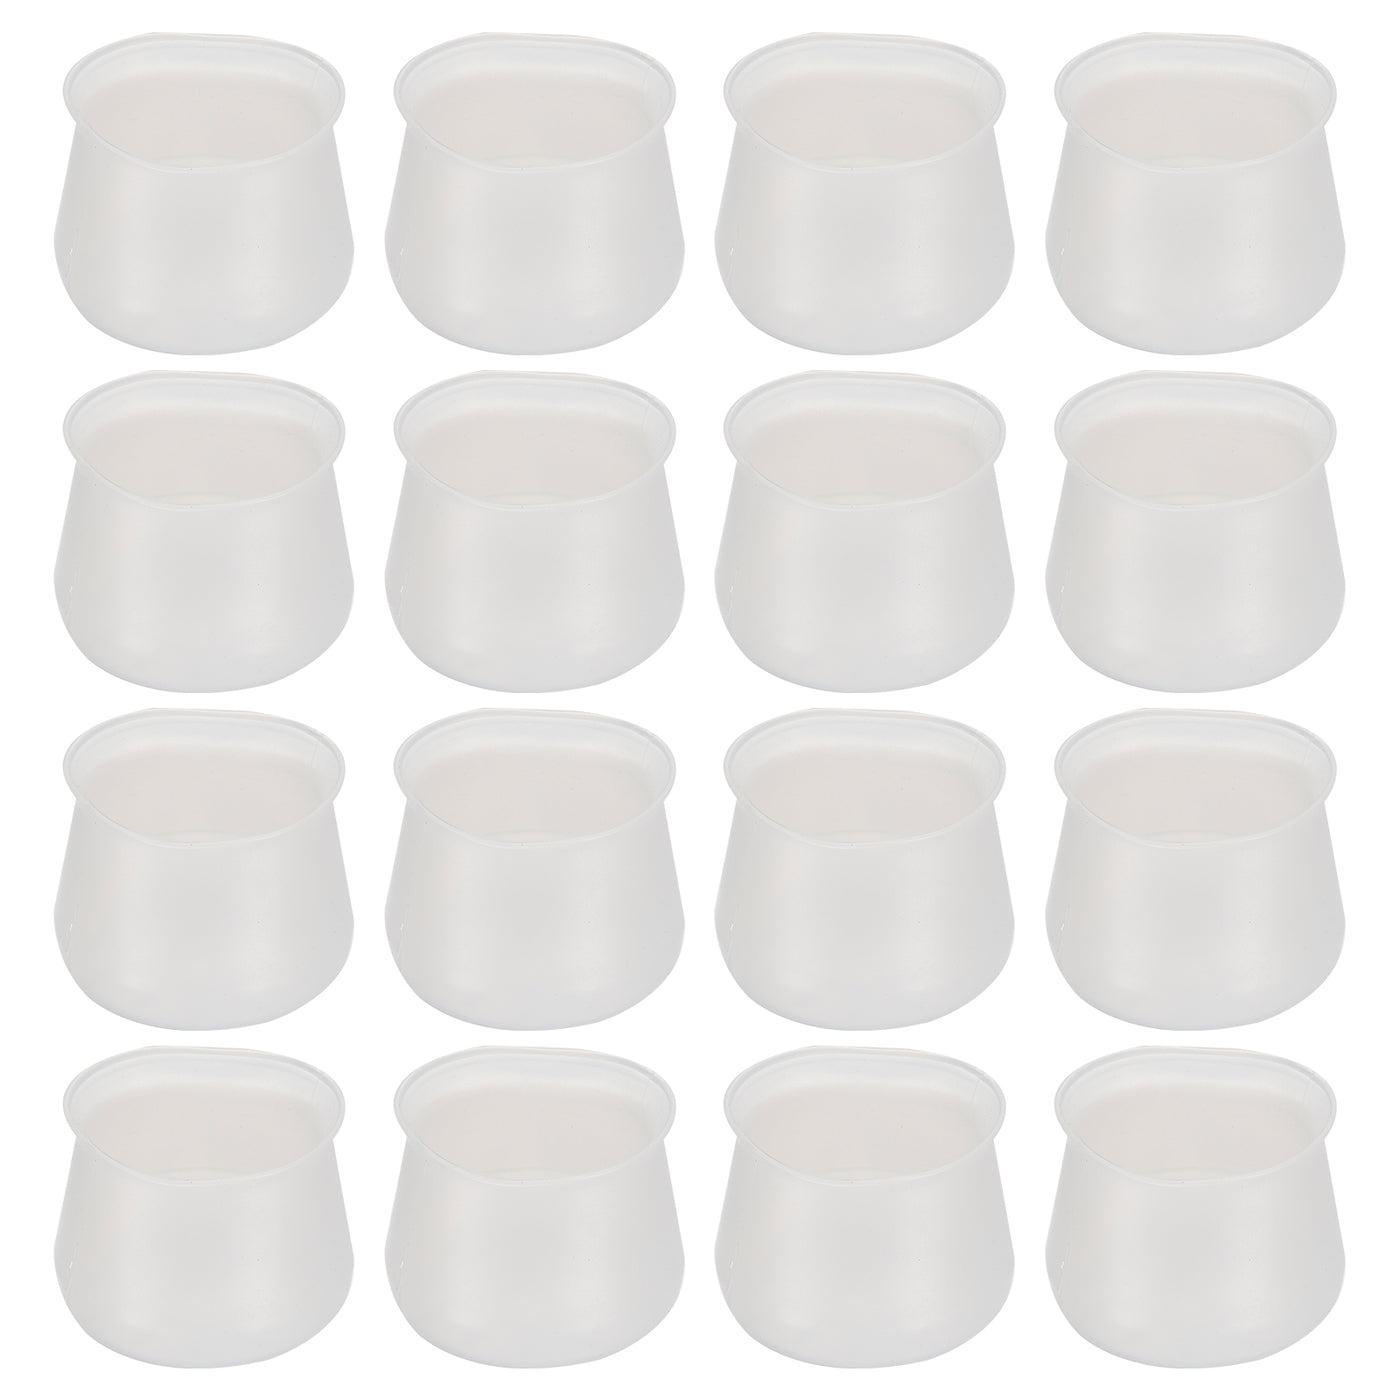 uxcell Uxcell Chair Leg Floor Protectors, 16Pcs 38mm/ 1.5" Silicone Chair Leg Cover Caps for Hardwood Floors (Transparent)